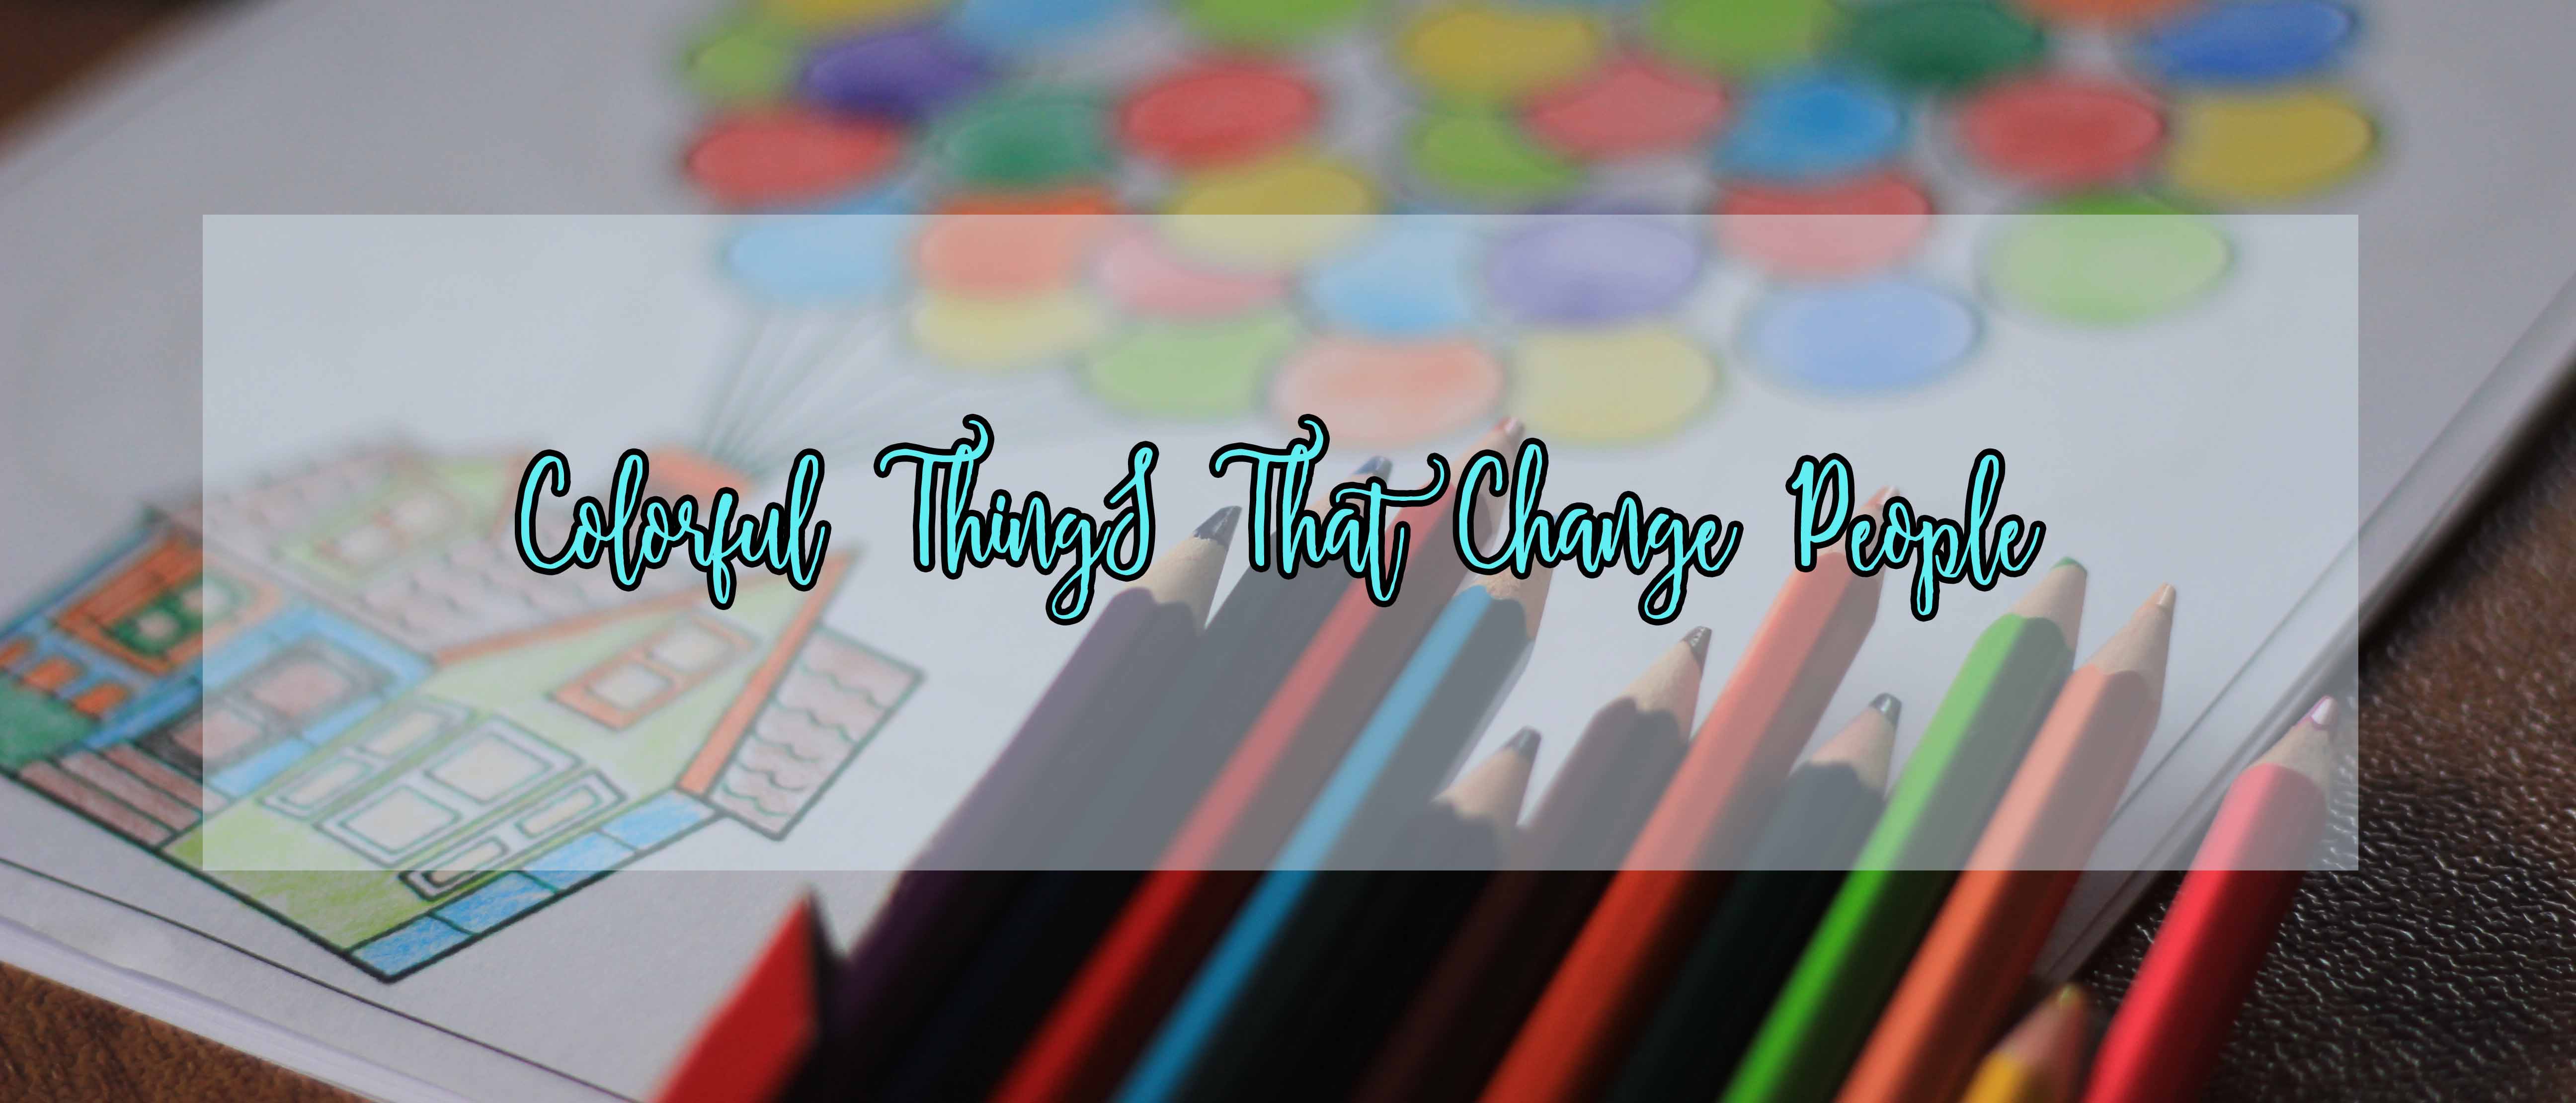 How Do Colorful Things Change People?